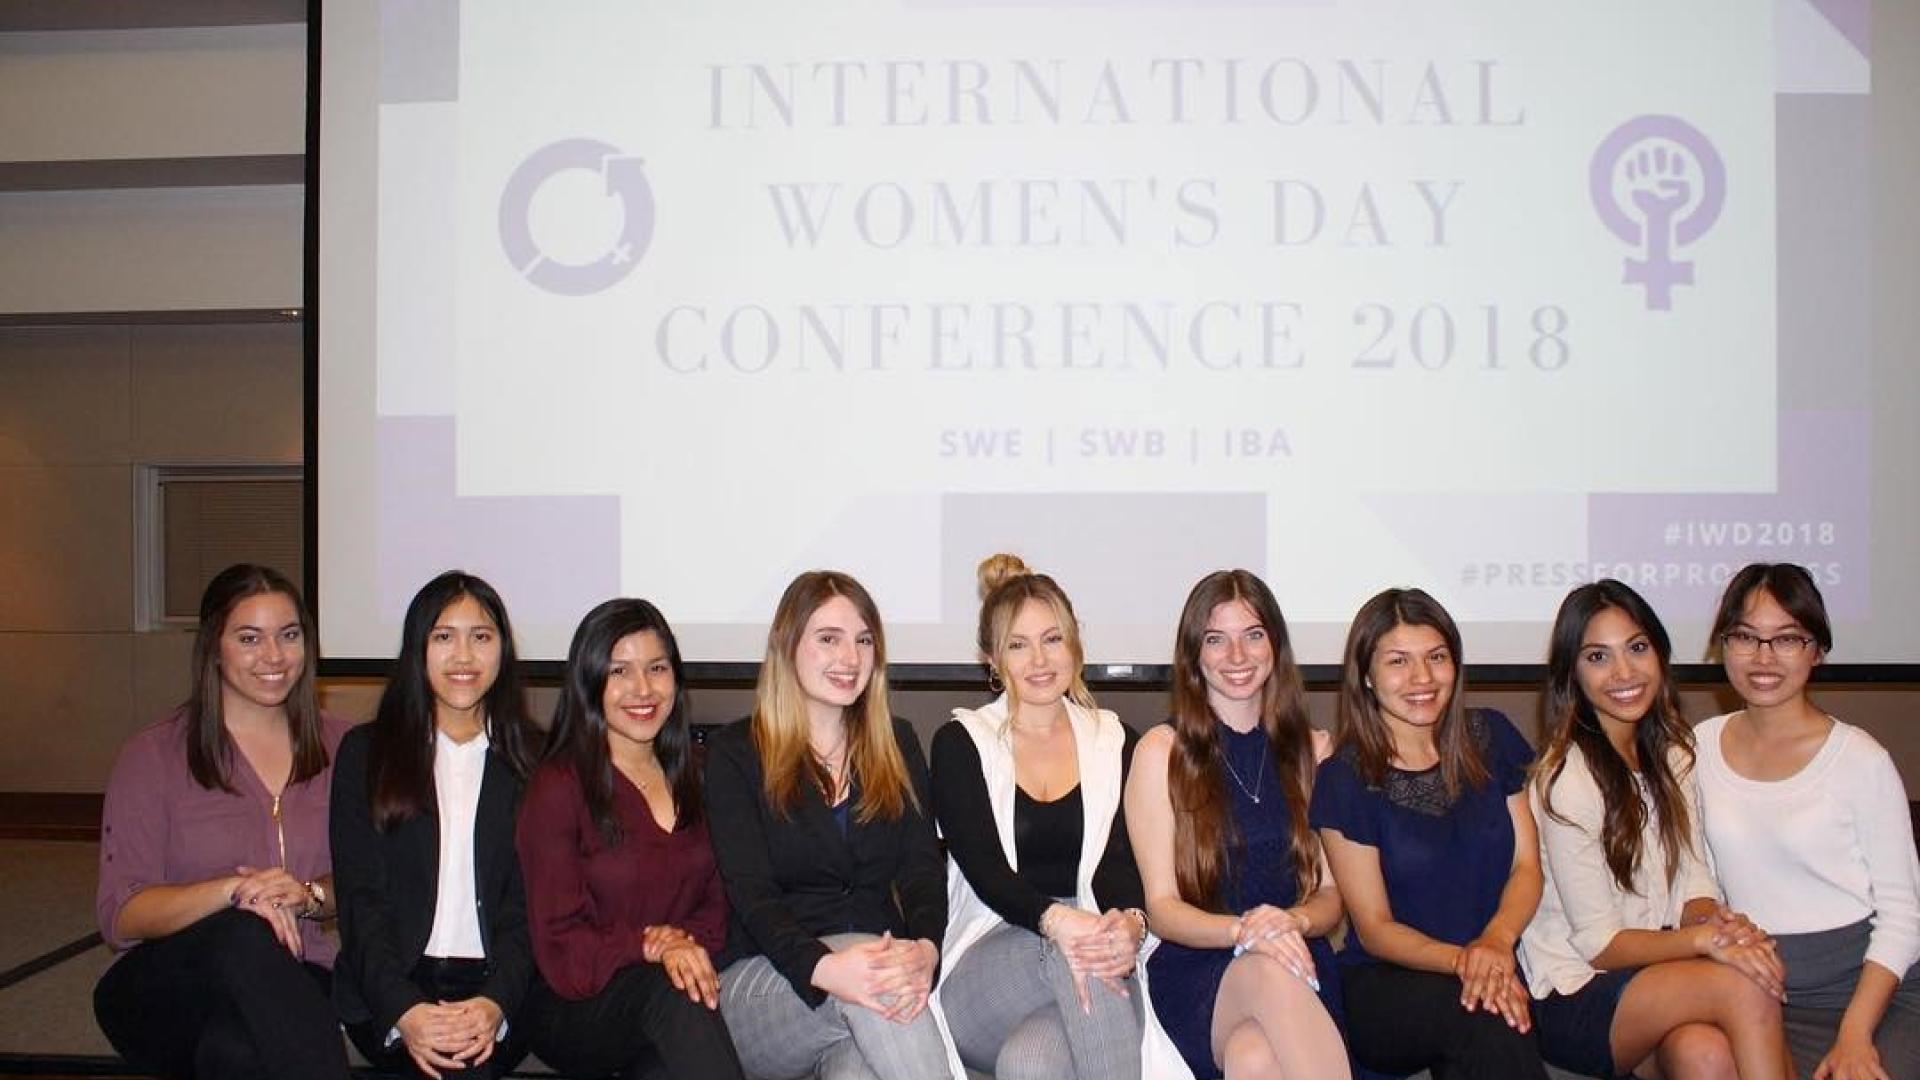 International Women's Day Conference 2018